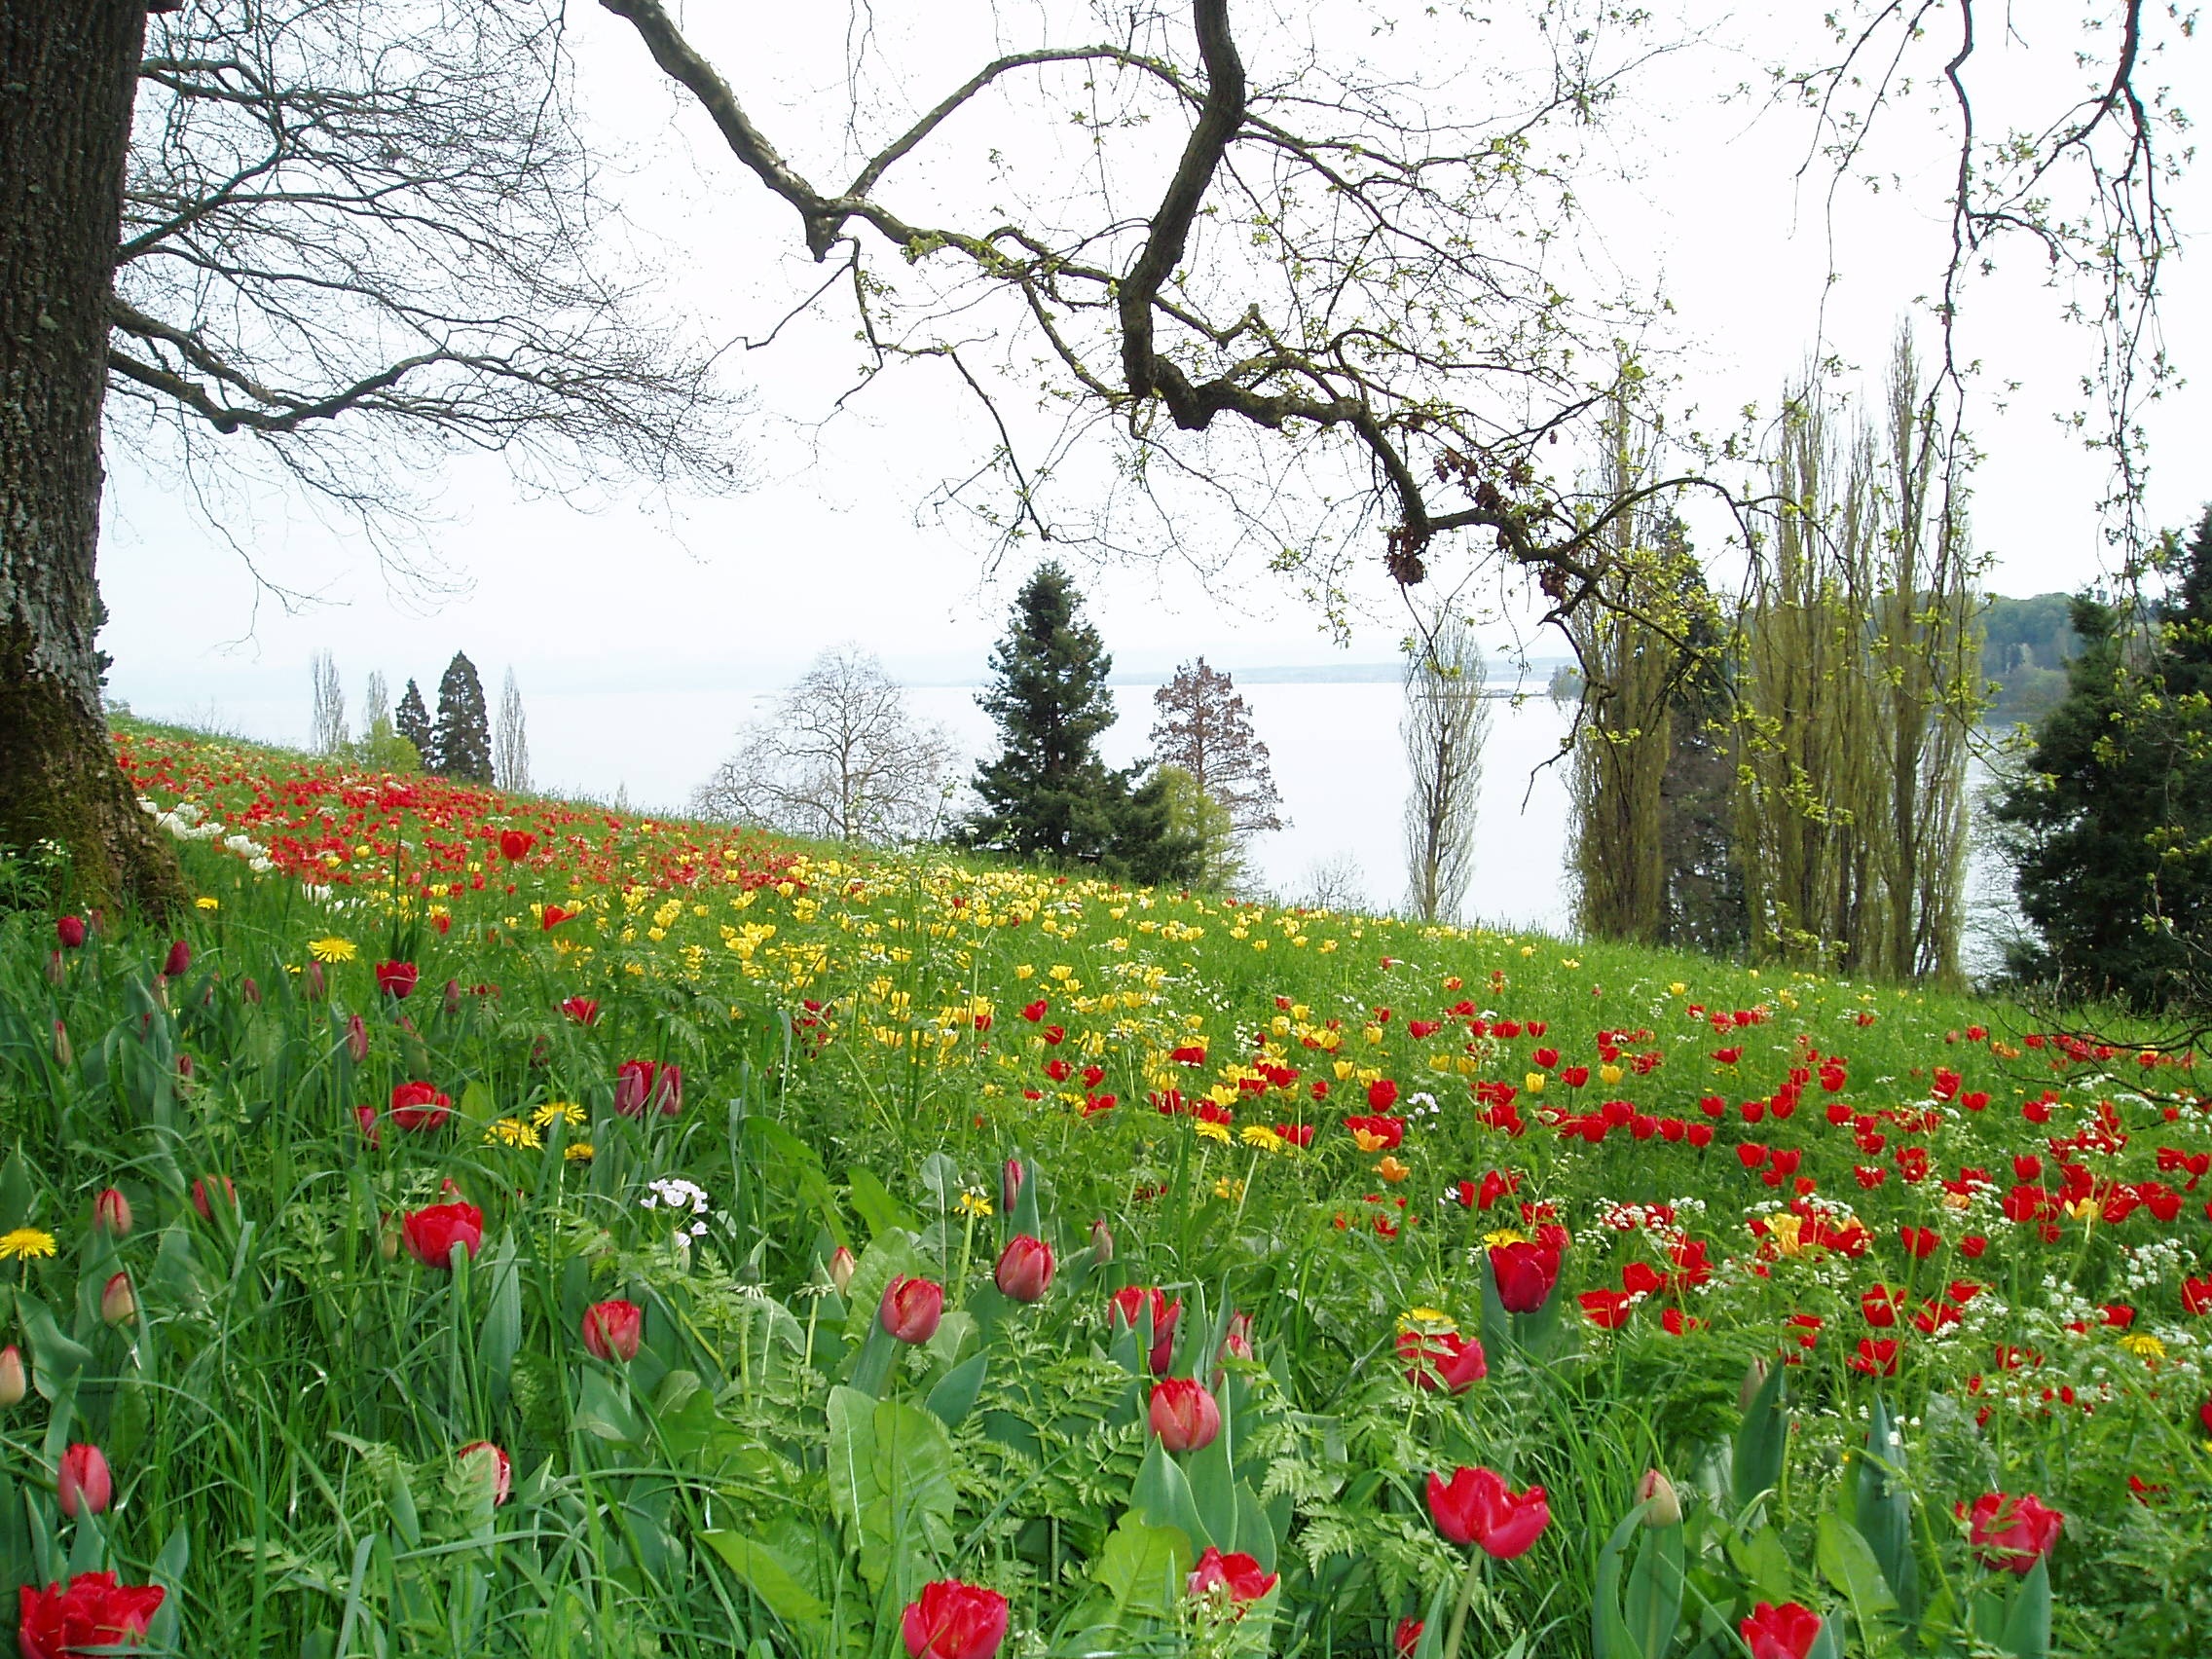 Tulips Meadow Flowers free image download